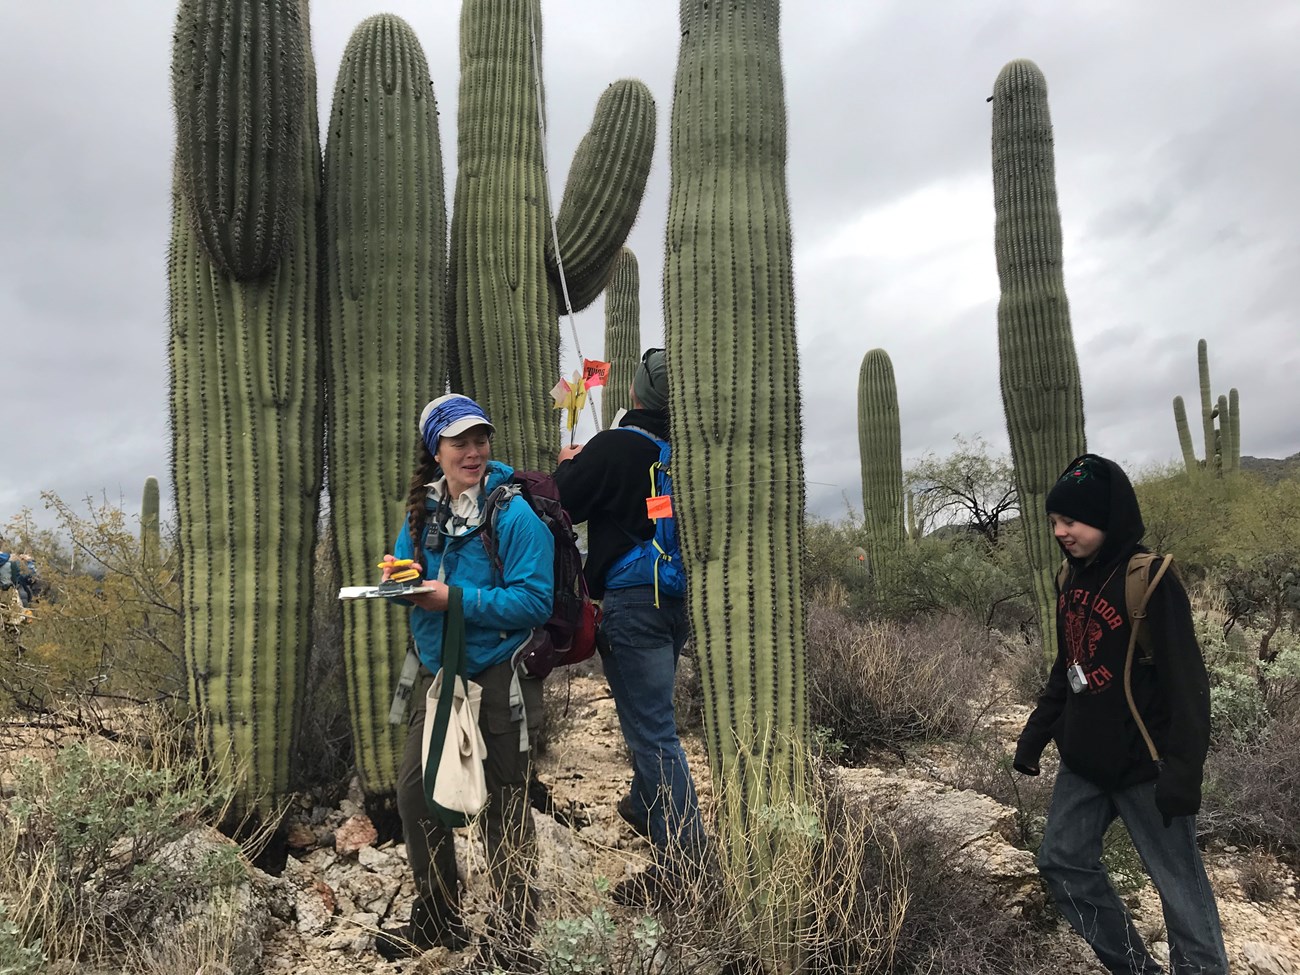 volunteers talking and measuring the height of a tall saguaro